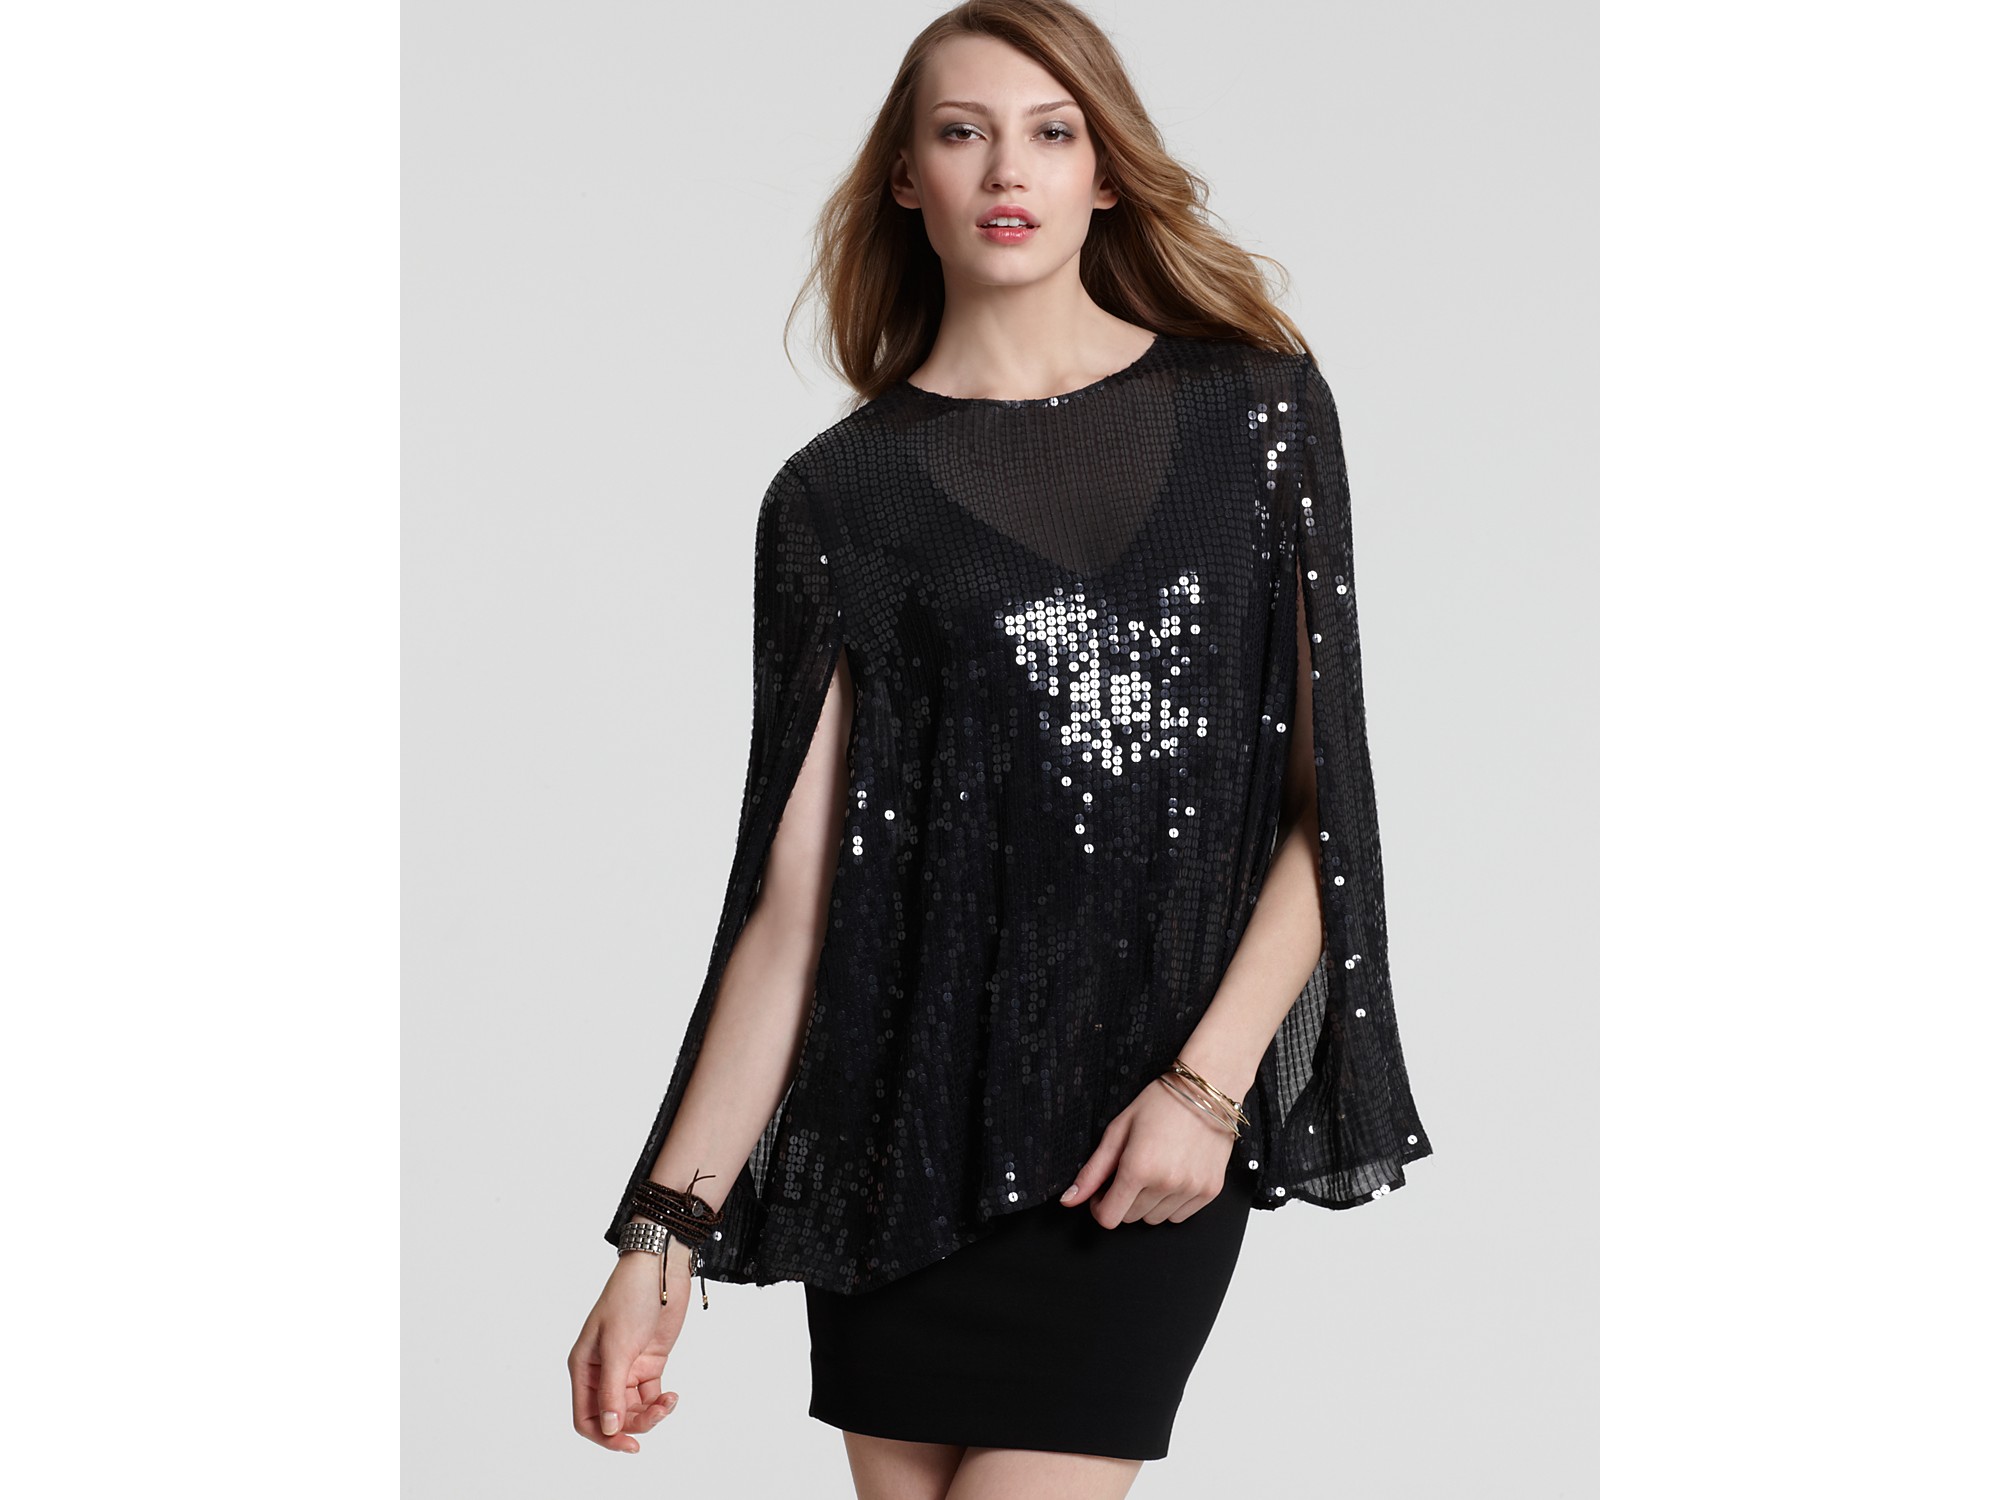 Lyst - Dkny Sequin Cape Blouse in Black